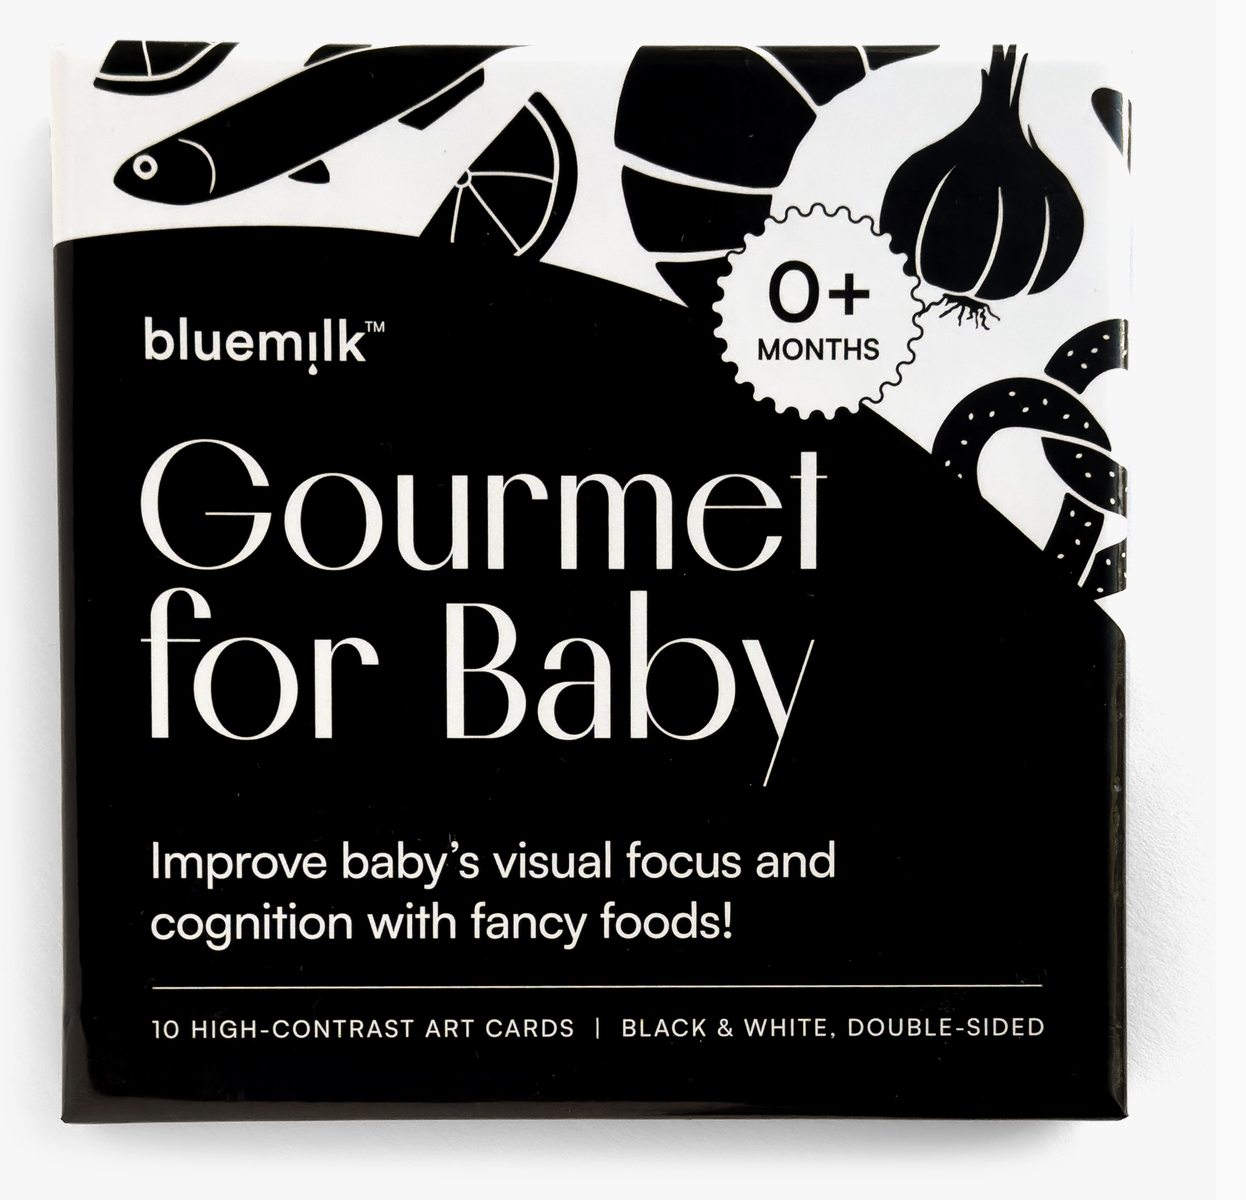 Pasta for Baby High Contrast Cards Sensory Toy Learning Activity Large  Black and White Flash Cards Newborn Tummy Time Play 0+ Months Infant  Essentials